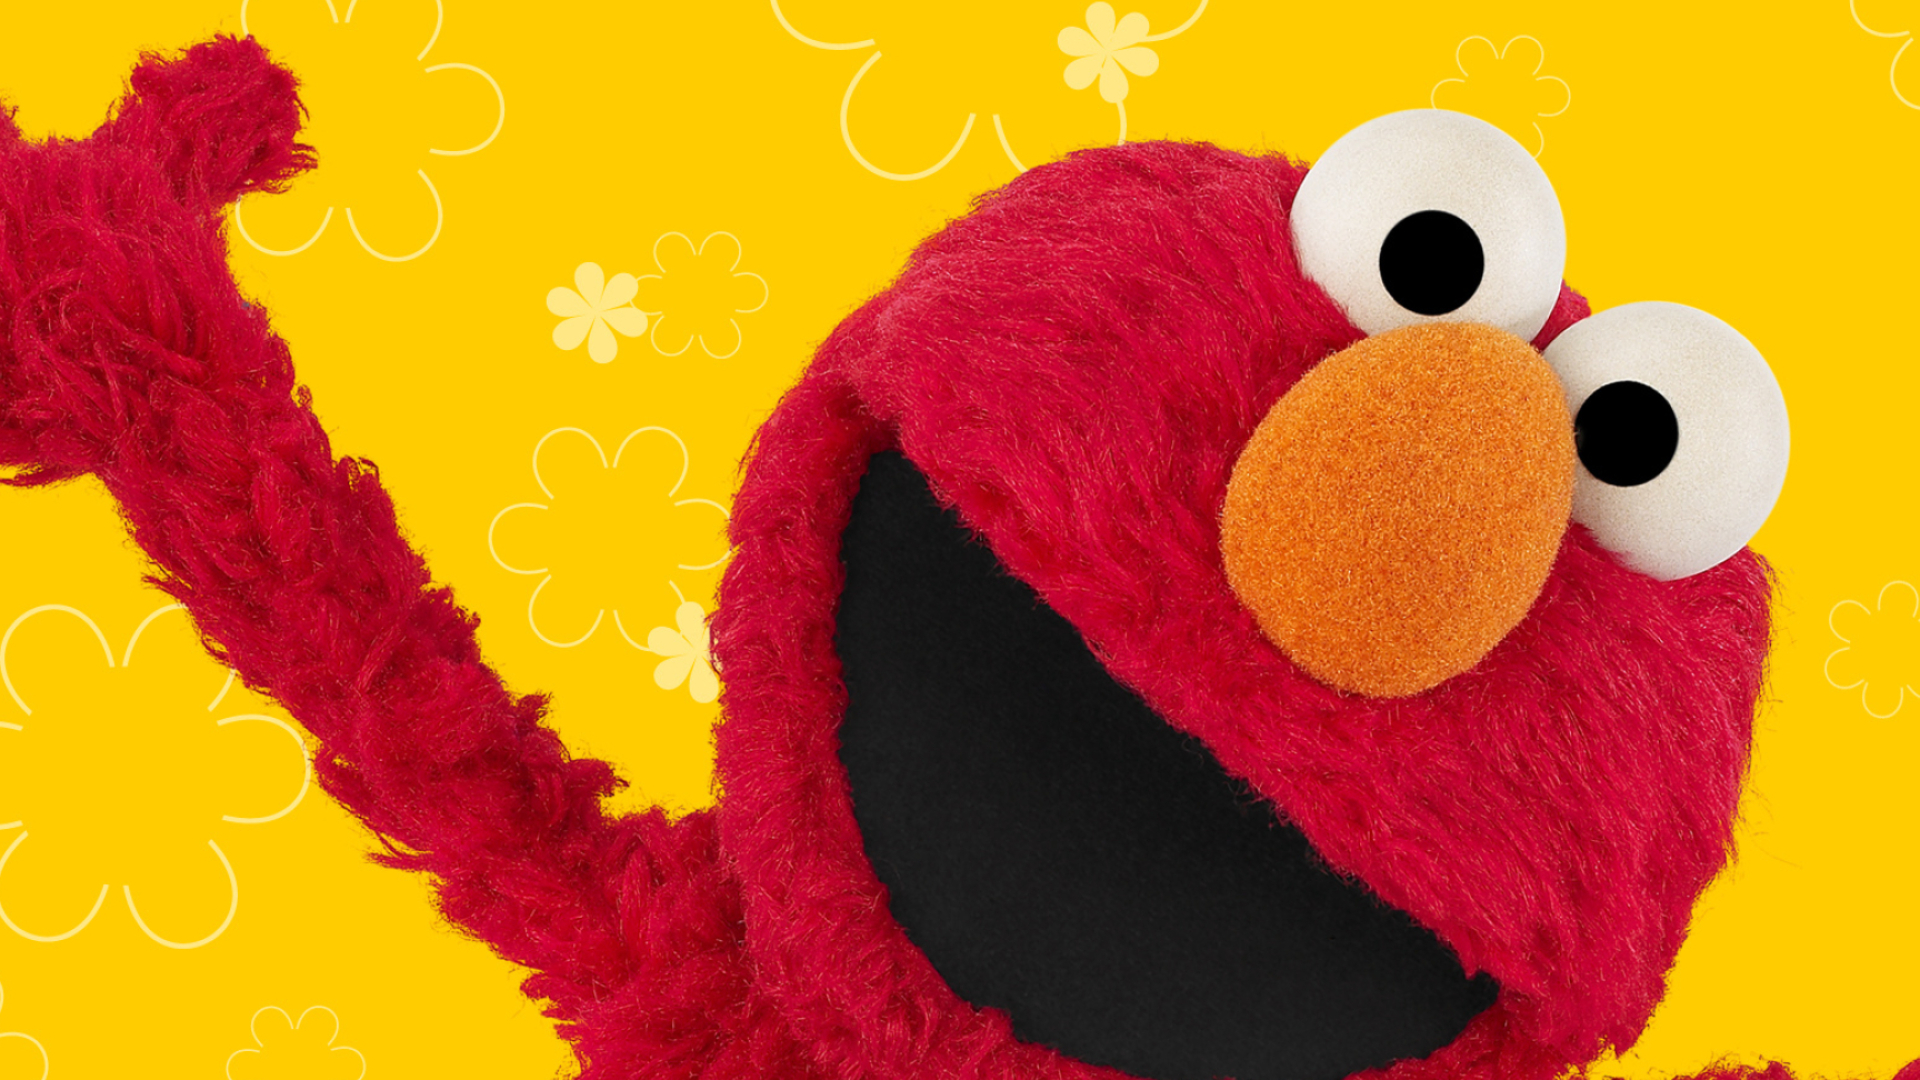 Sesame Street, HD wallpapers, Colorful characters, Vibrant backgrounds, 1920x1080 Full HD Desktop